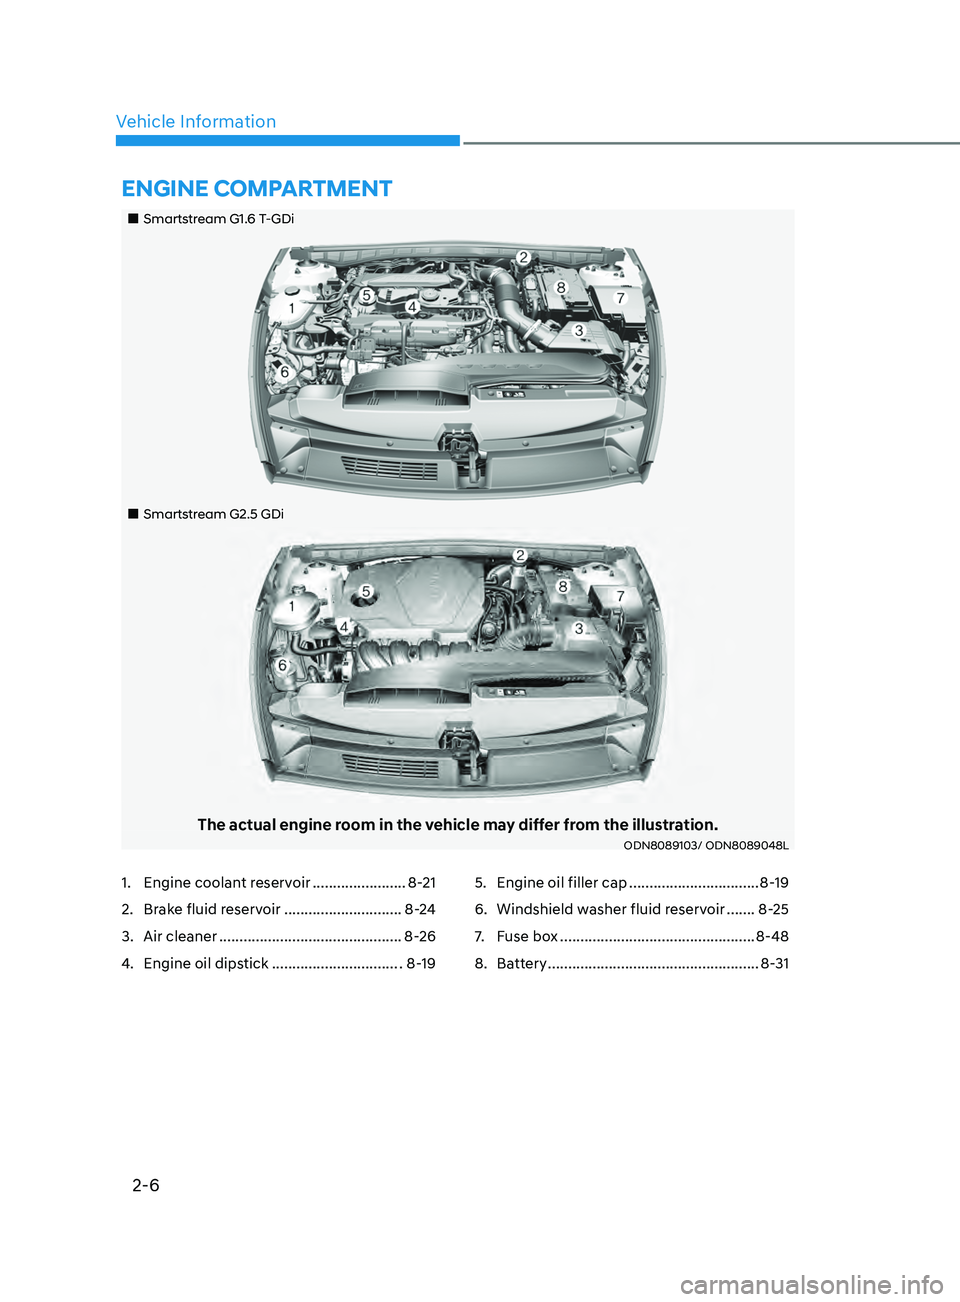 HYUNDAI SONATA LIMITED 2020 User Guide 2-6
Vehicle Information
„„Smartstream G1.6 T-GDi
„„Smartstream G2.5 GDi
The actual engine room in the vehicle may differ from the illustration.ODN8089103/ ODN8089048L
EnginE ComPar